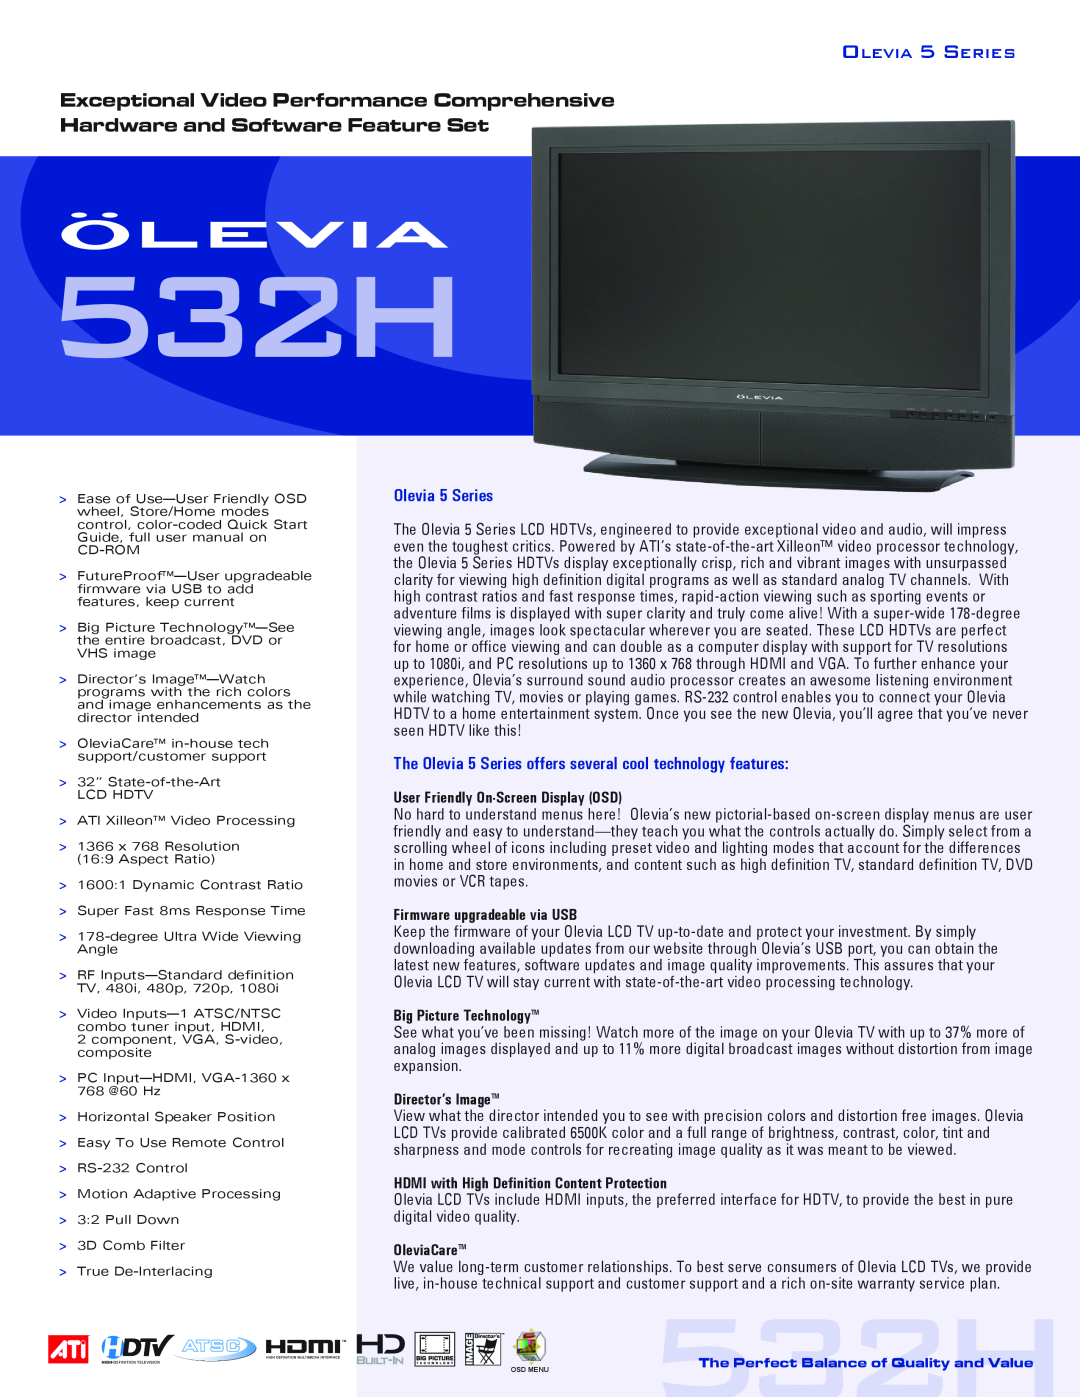 Brilliant Label 532H quick start Exceptional Video Performance Comprehensive, Hardware and Software Feature Set 